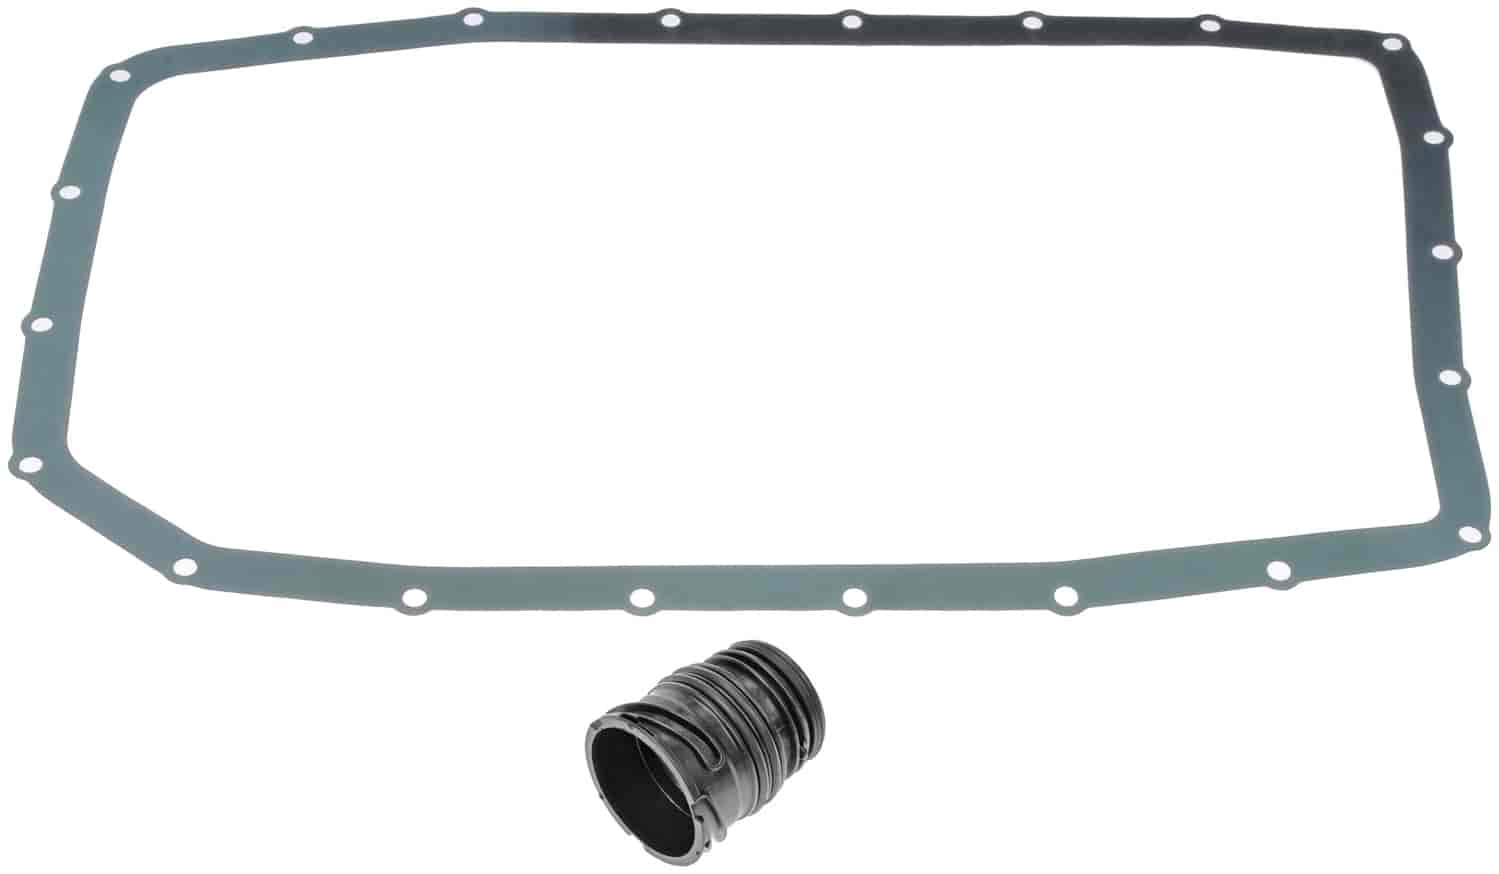 Transmission Electrical Connector Sealing Sleeve